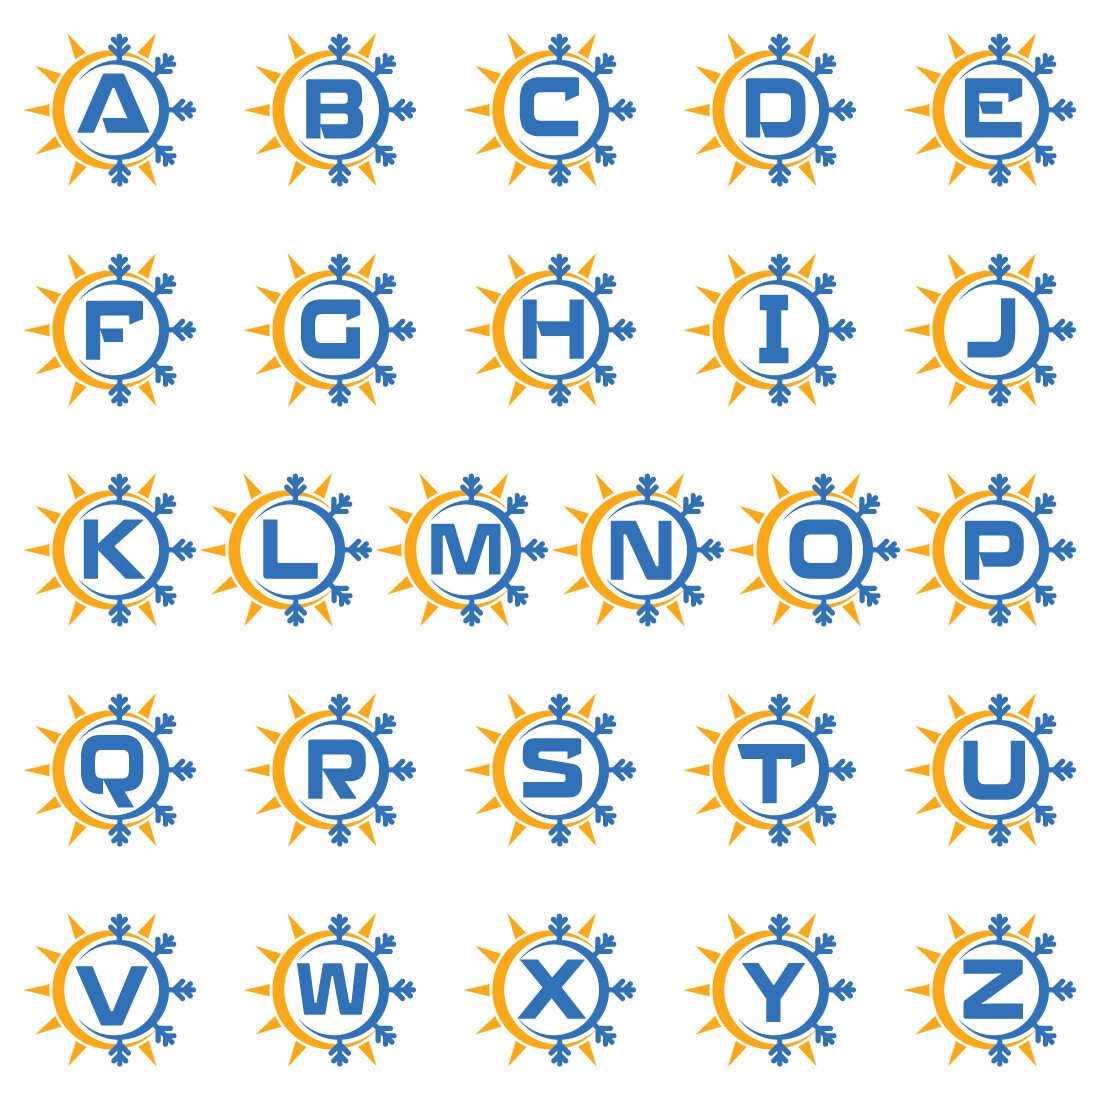 Initial A-Z monogram alphabet with abstract sun and snow Air conditioner logo sign symbol Hot and cold symbol preview image.